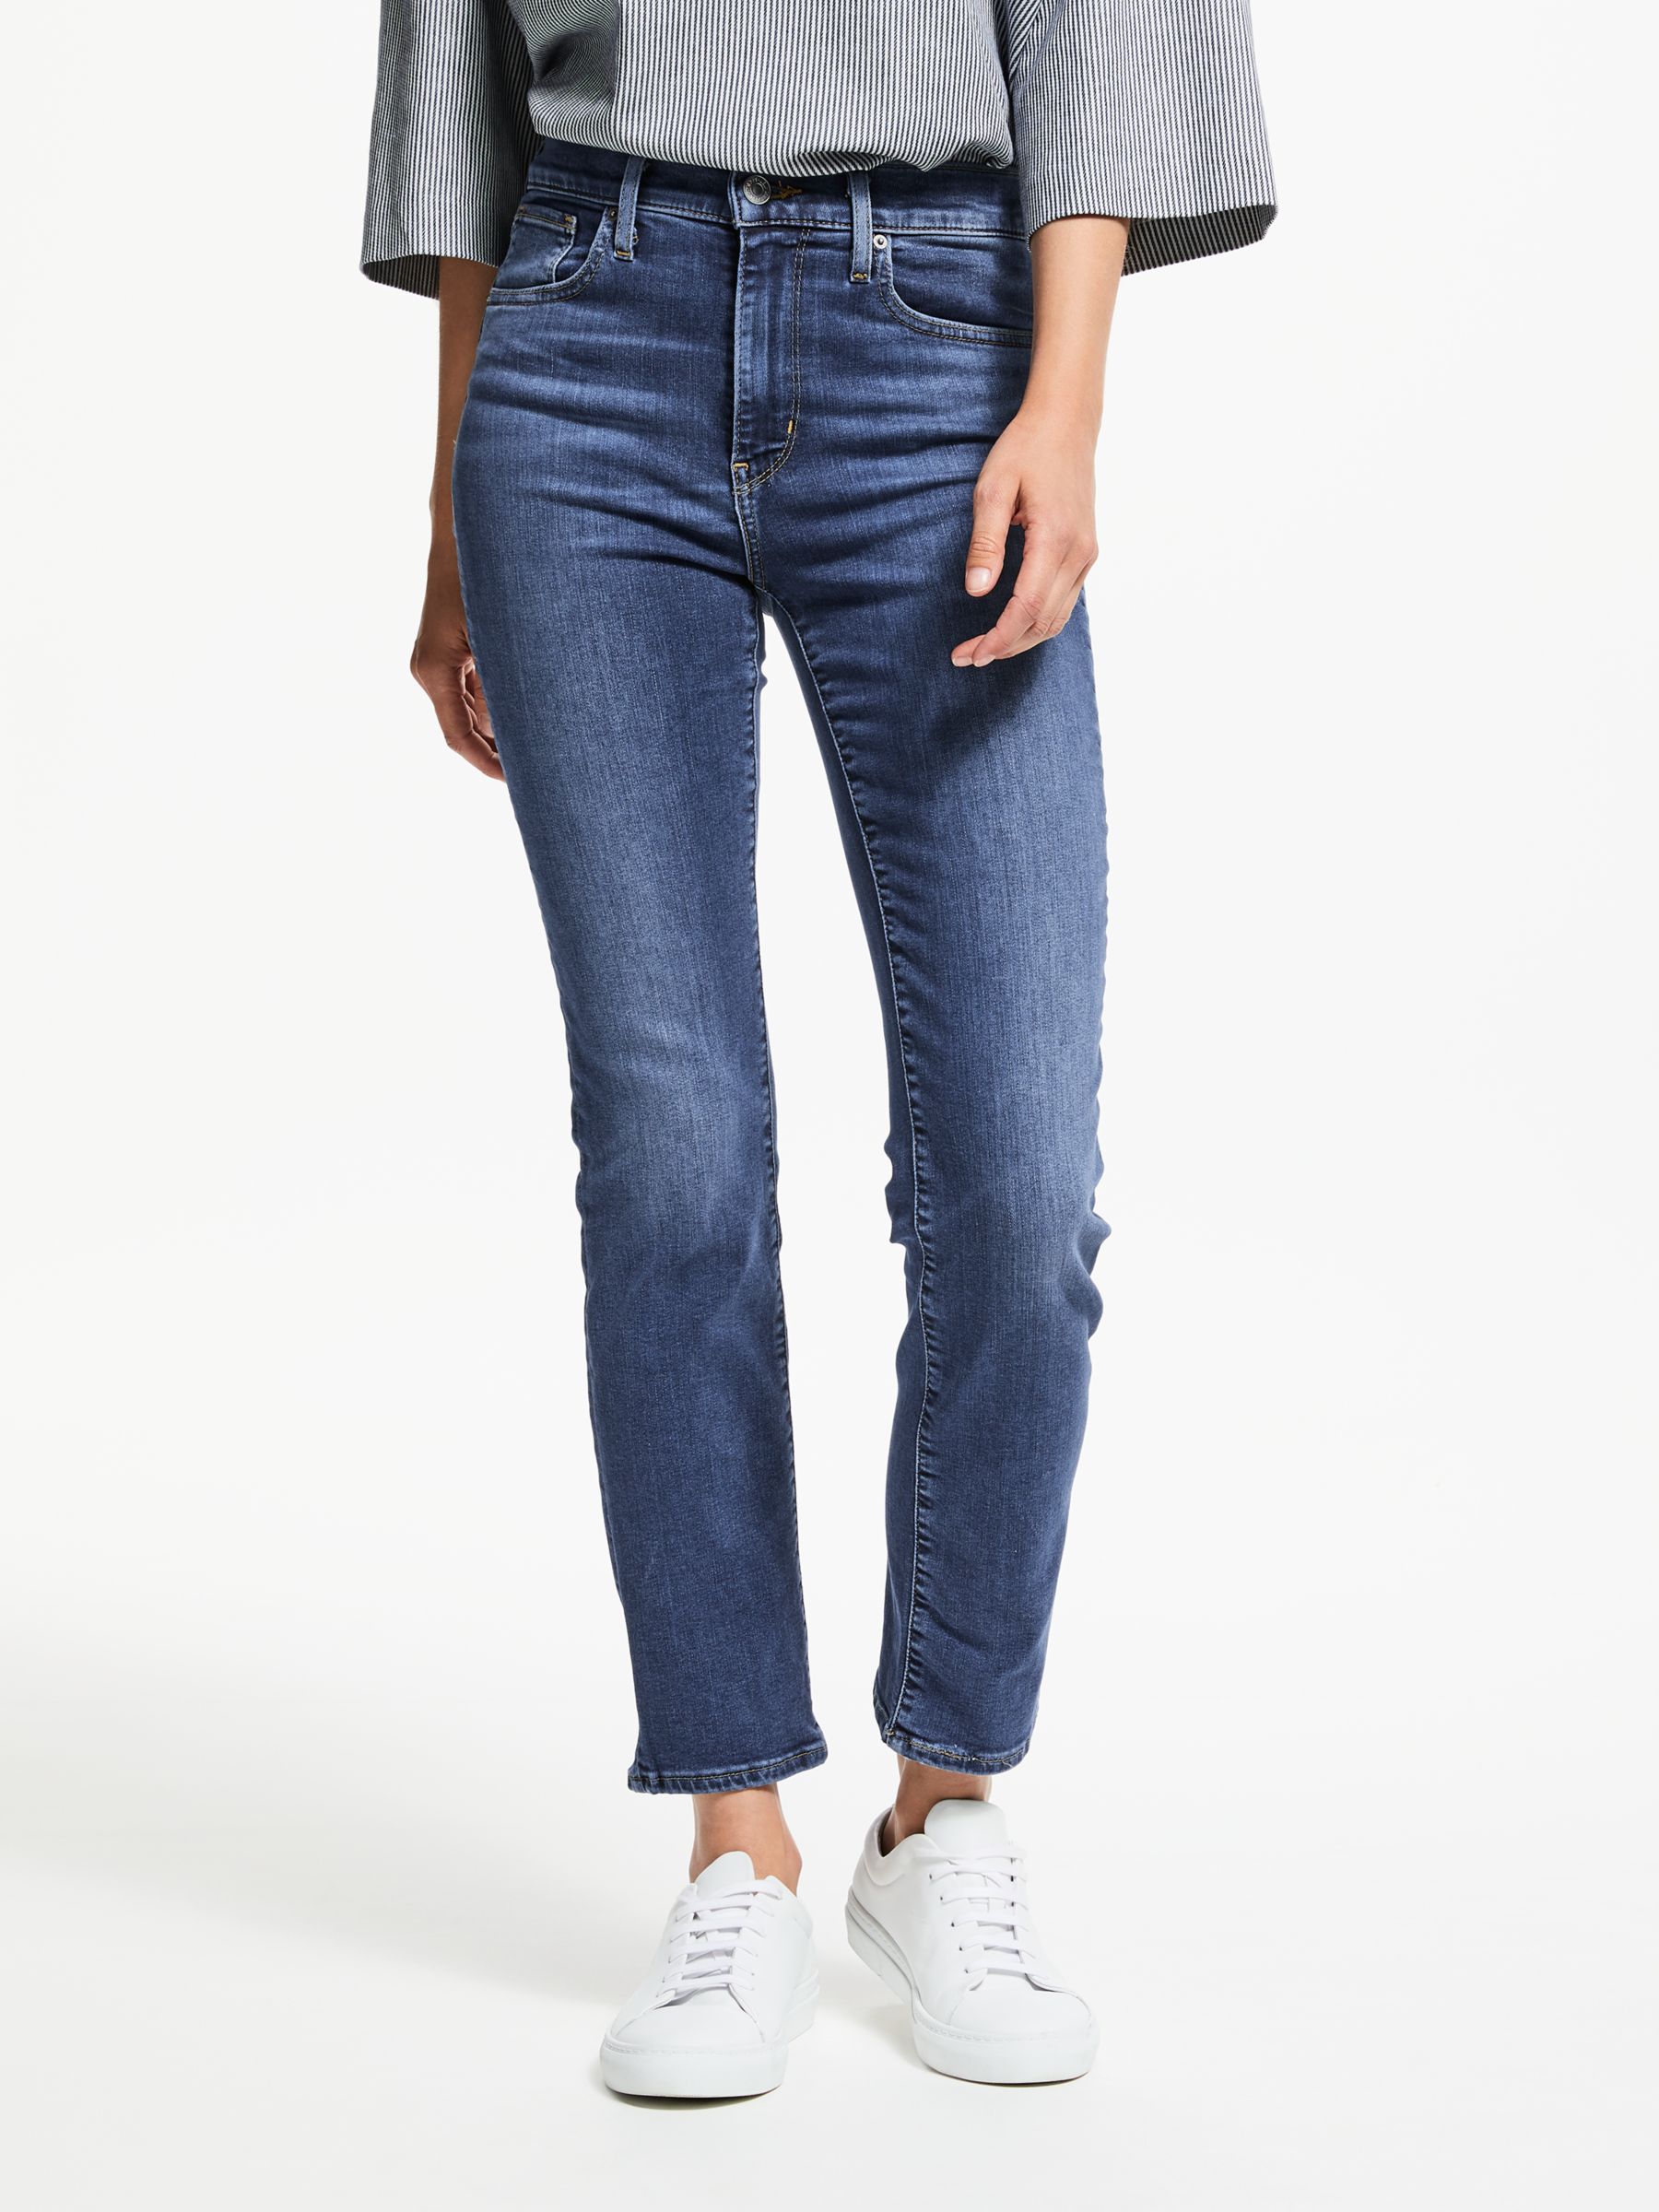 Levi's 724 High Rise Straight Jeans at John Lewis & Partners